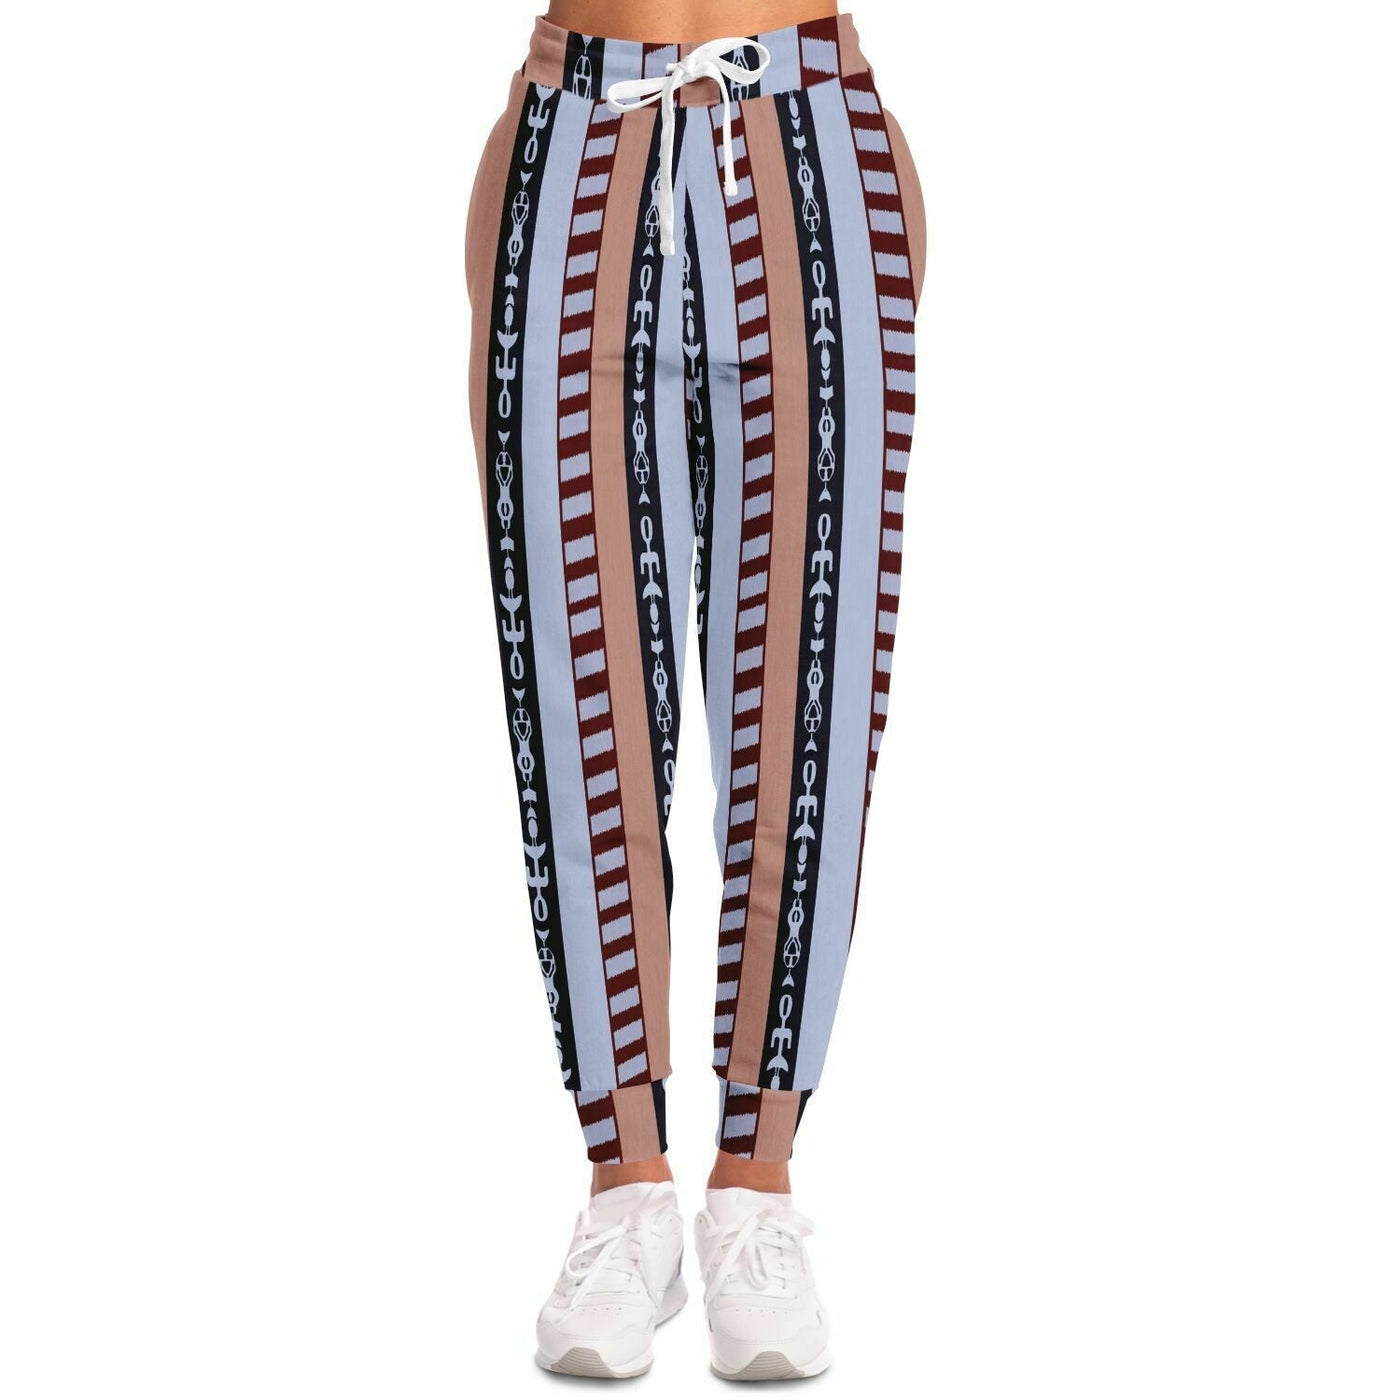 The Dude's Joggers with Iconic Lebowski Pajamas Pattern